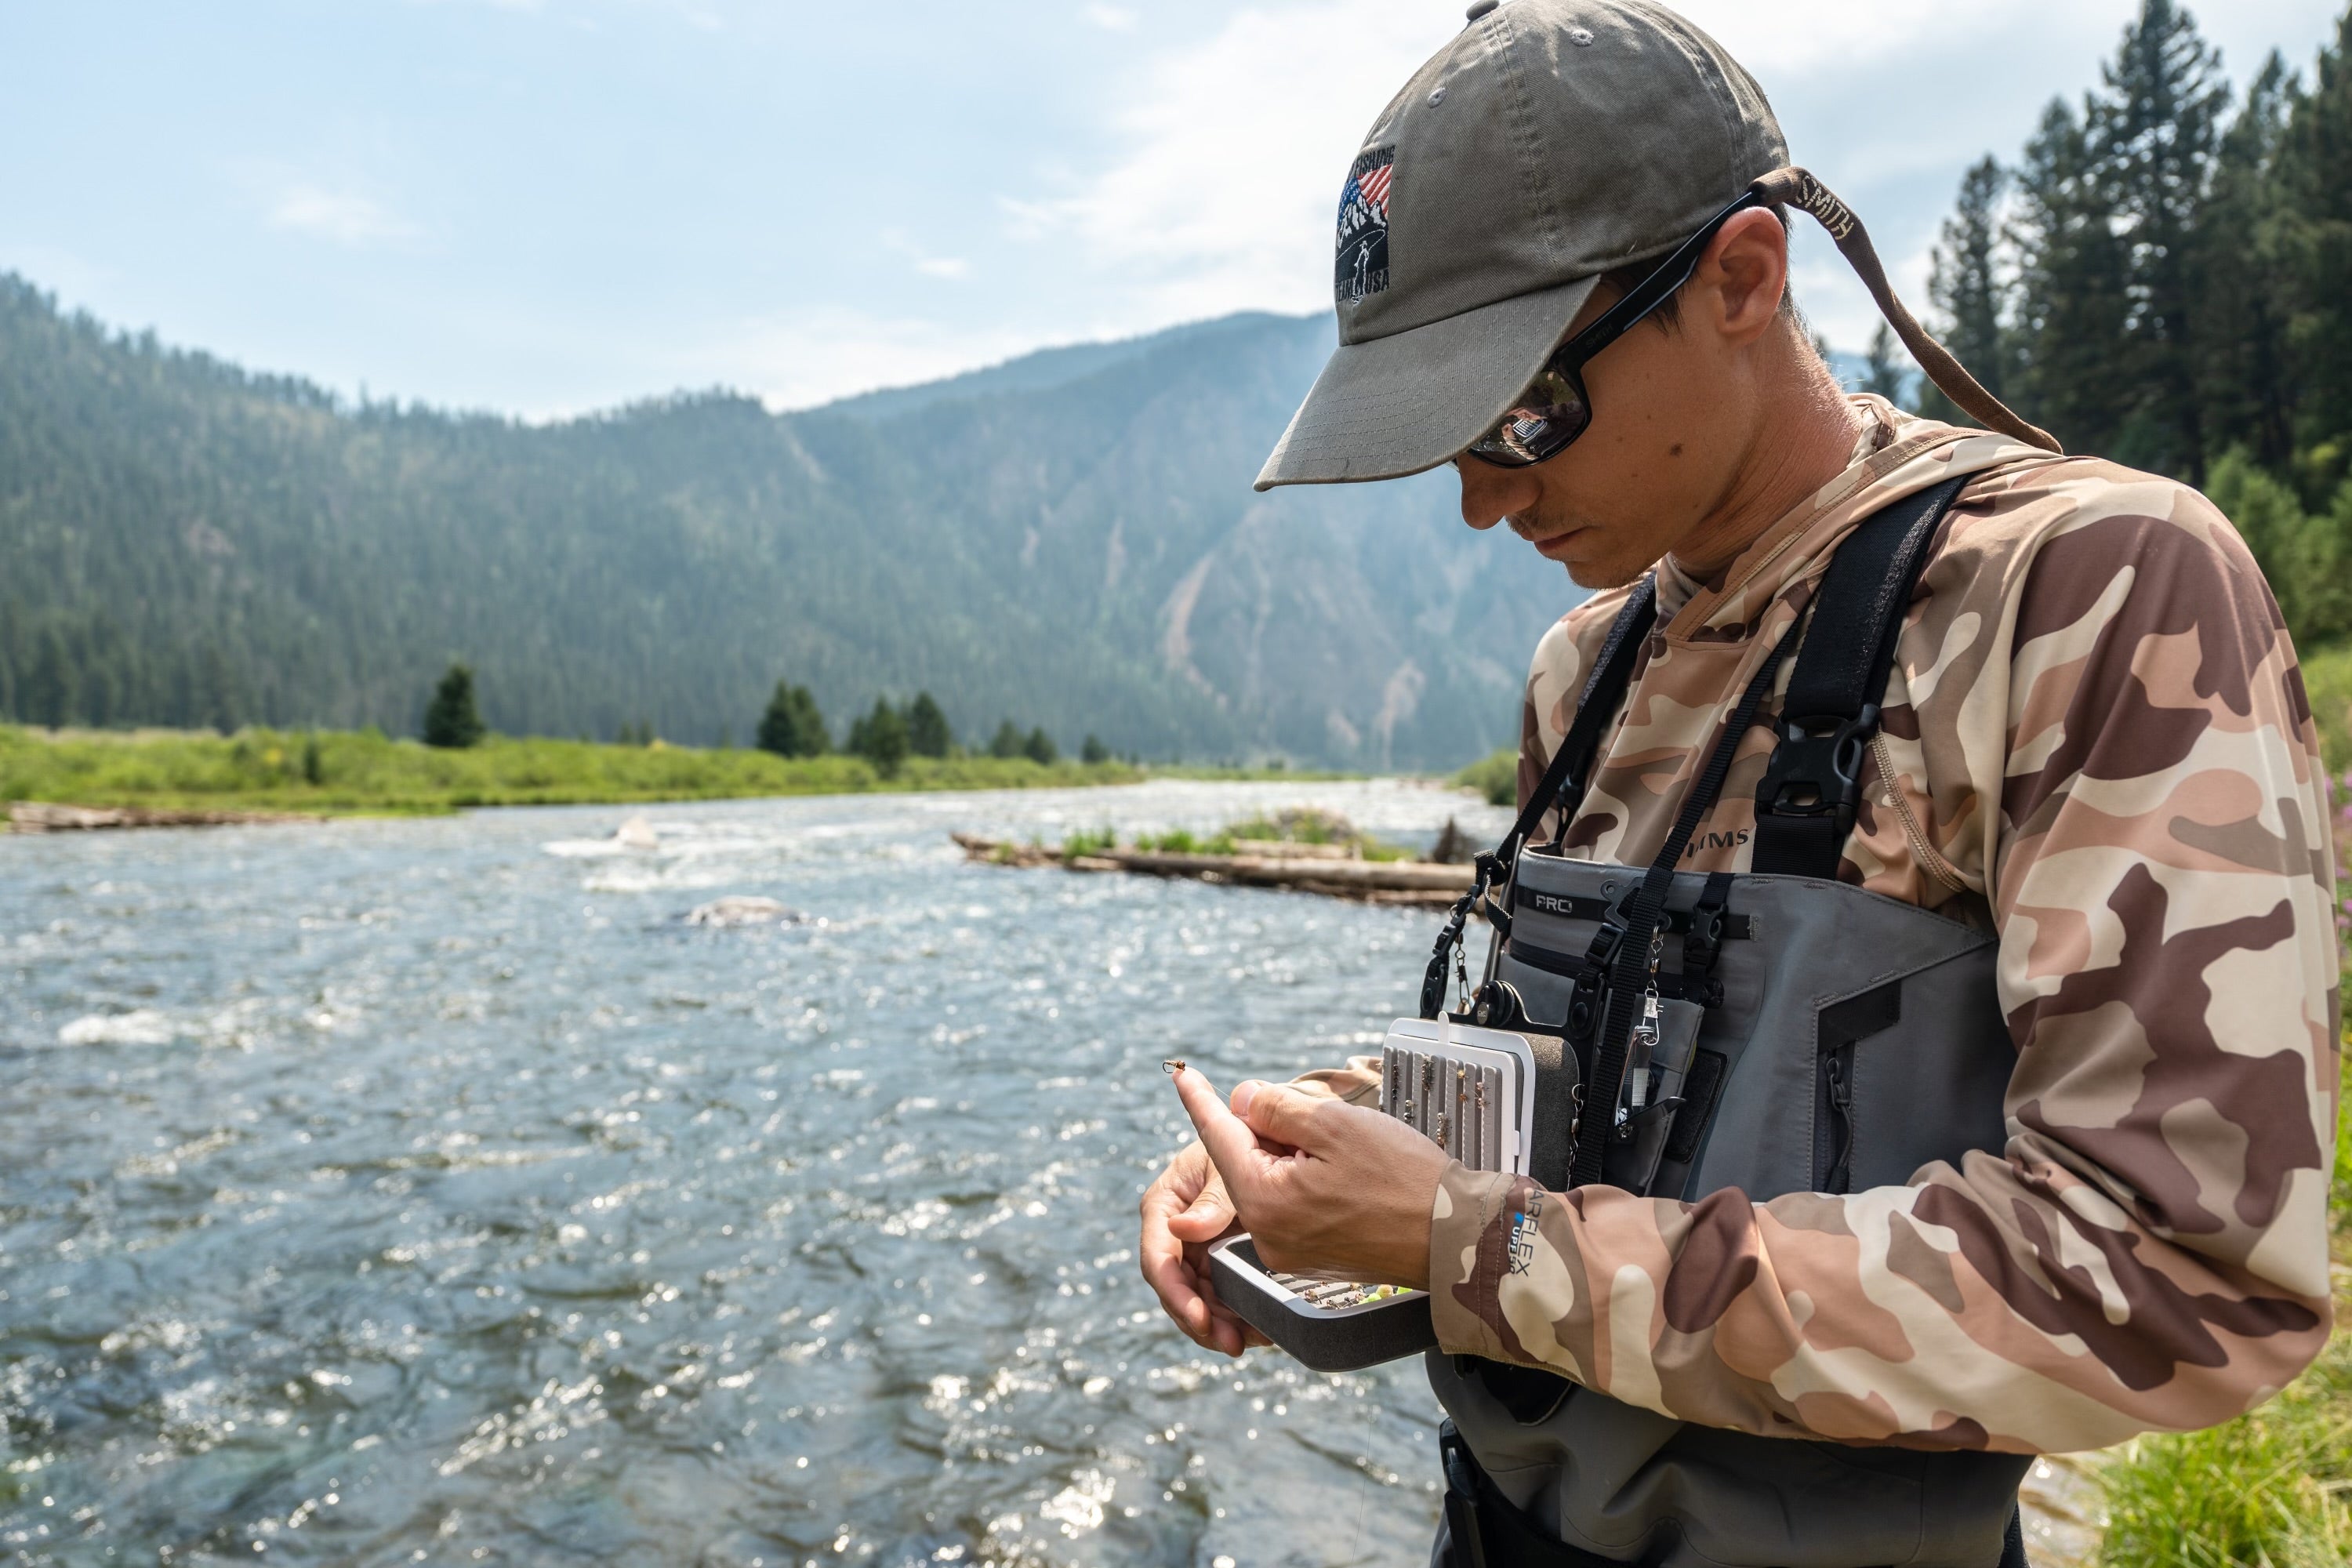 Josh Miller tying a fly to his line with a ball cap and waders on standing in a river with a mountain landscape back drop.